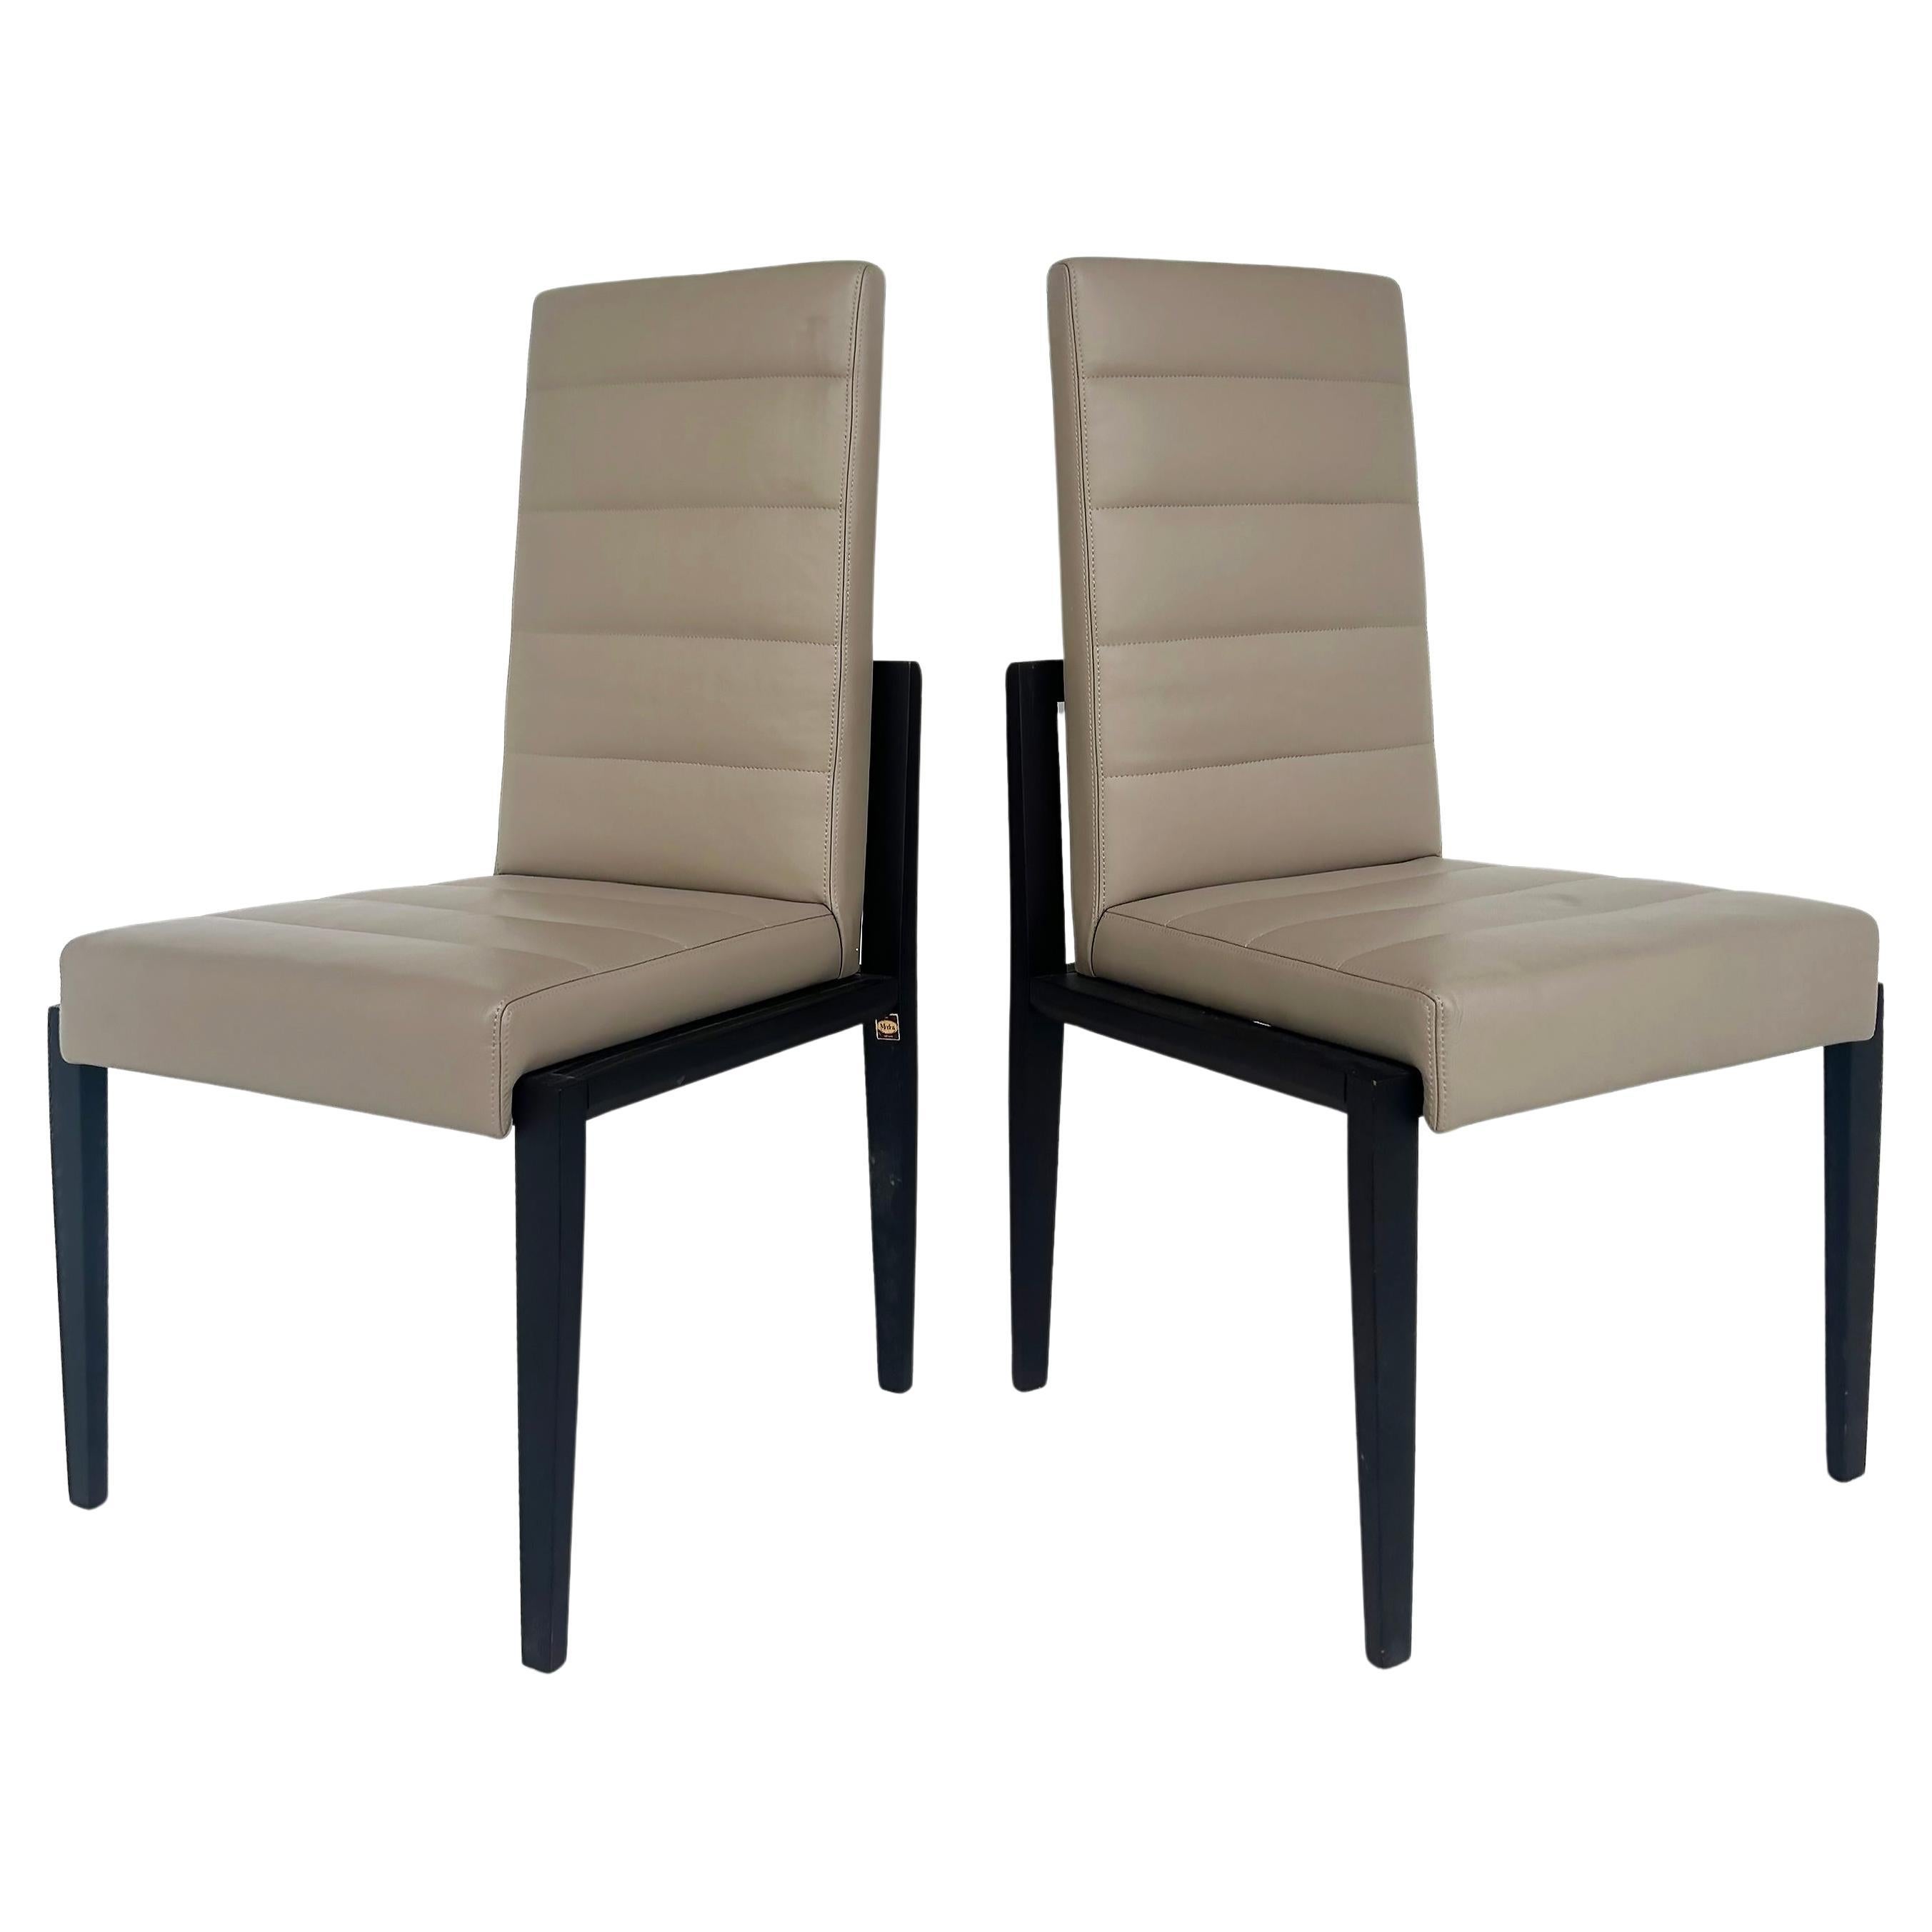 Umberto Asnago for Mobilidea Italian Leather/Oak Tall Chairs, Pair   For Sale